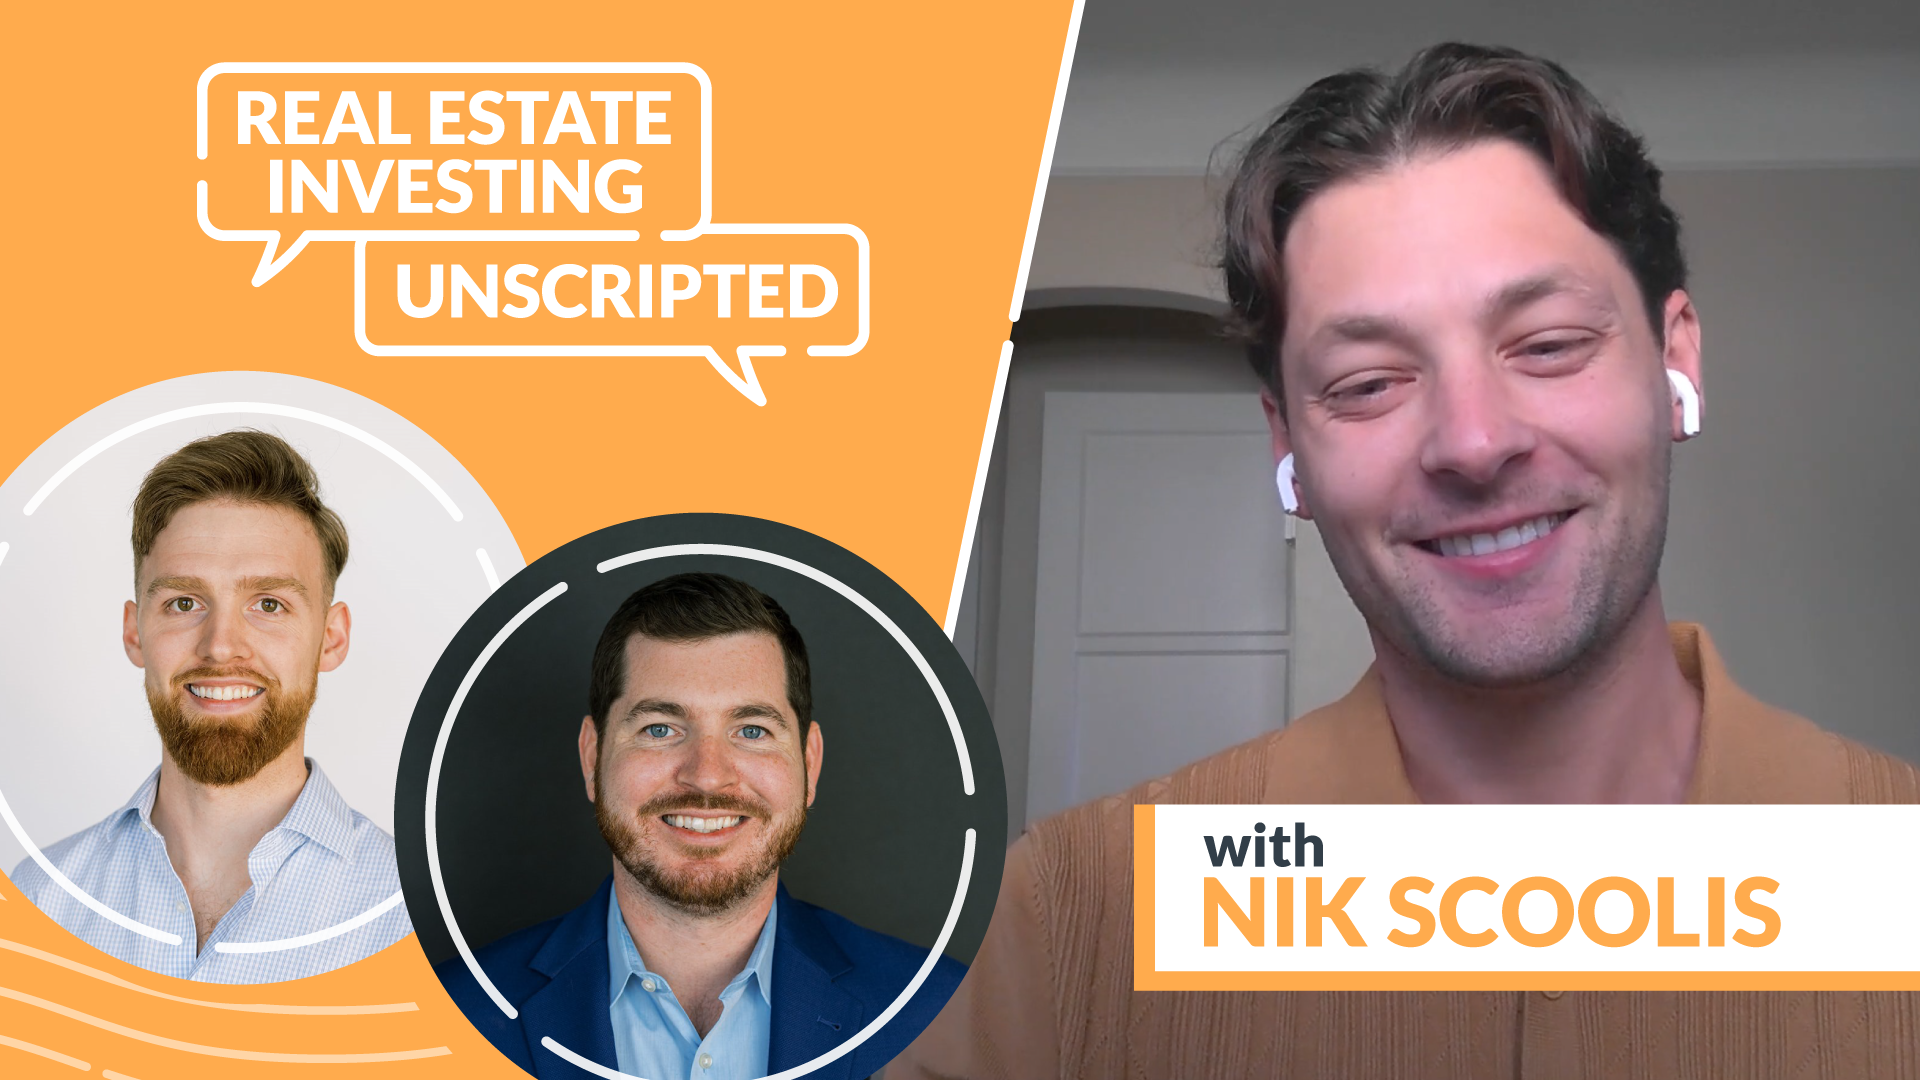 real estate investing unscripted episode 2 with Nik Scoolis